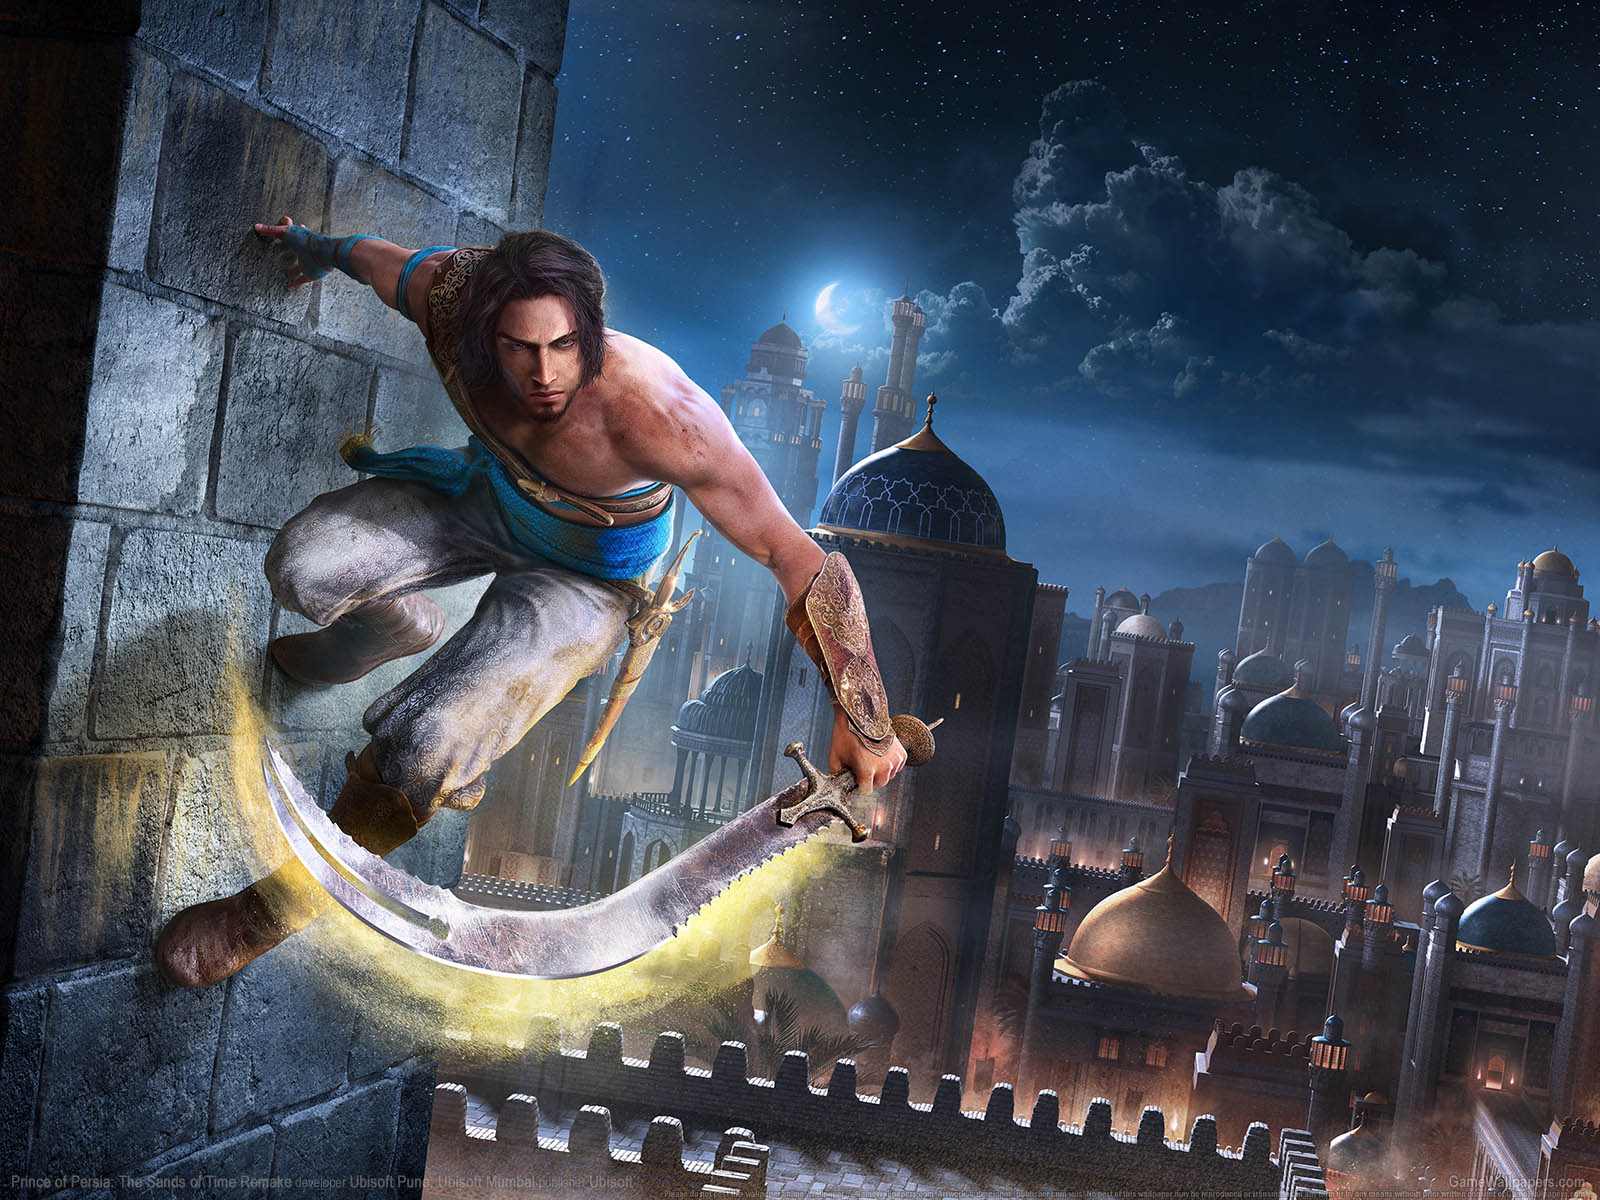 Prince of Persia: The Sands of Time Remake wallpaper 01 1600x1200